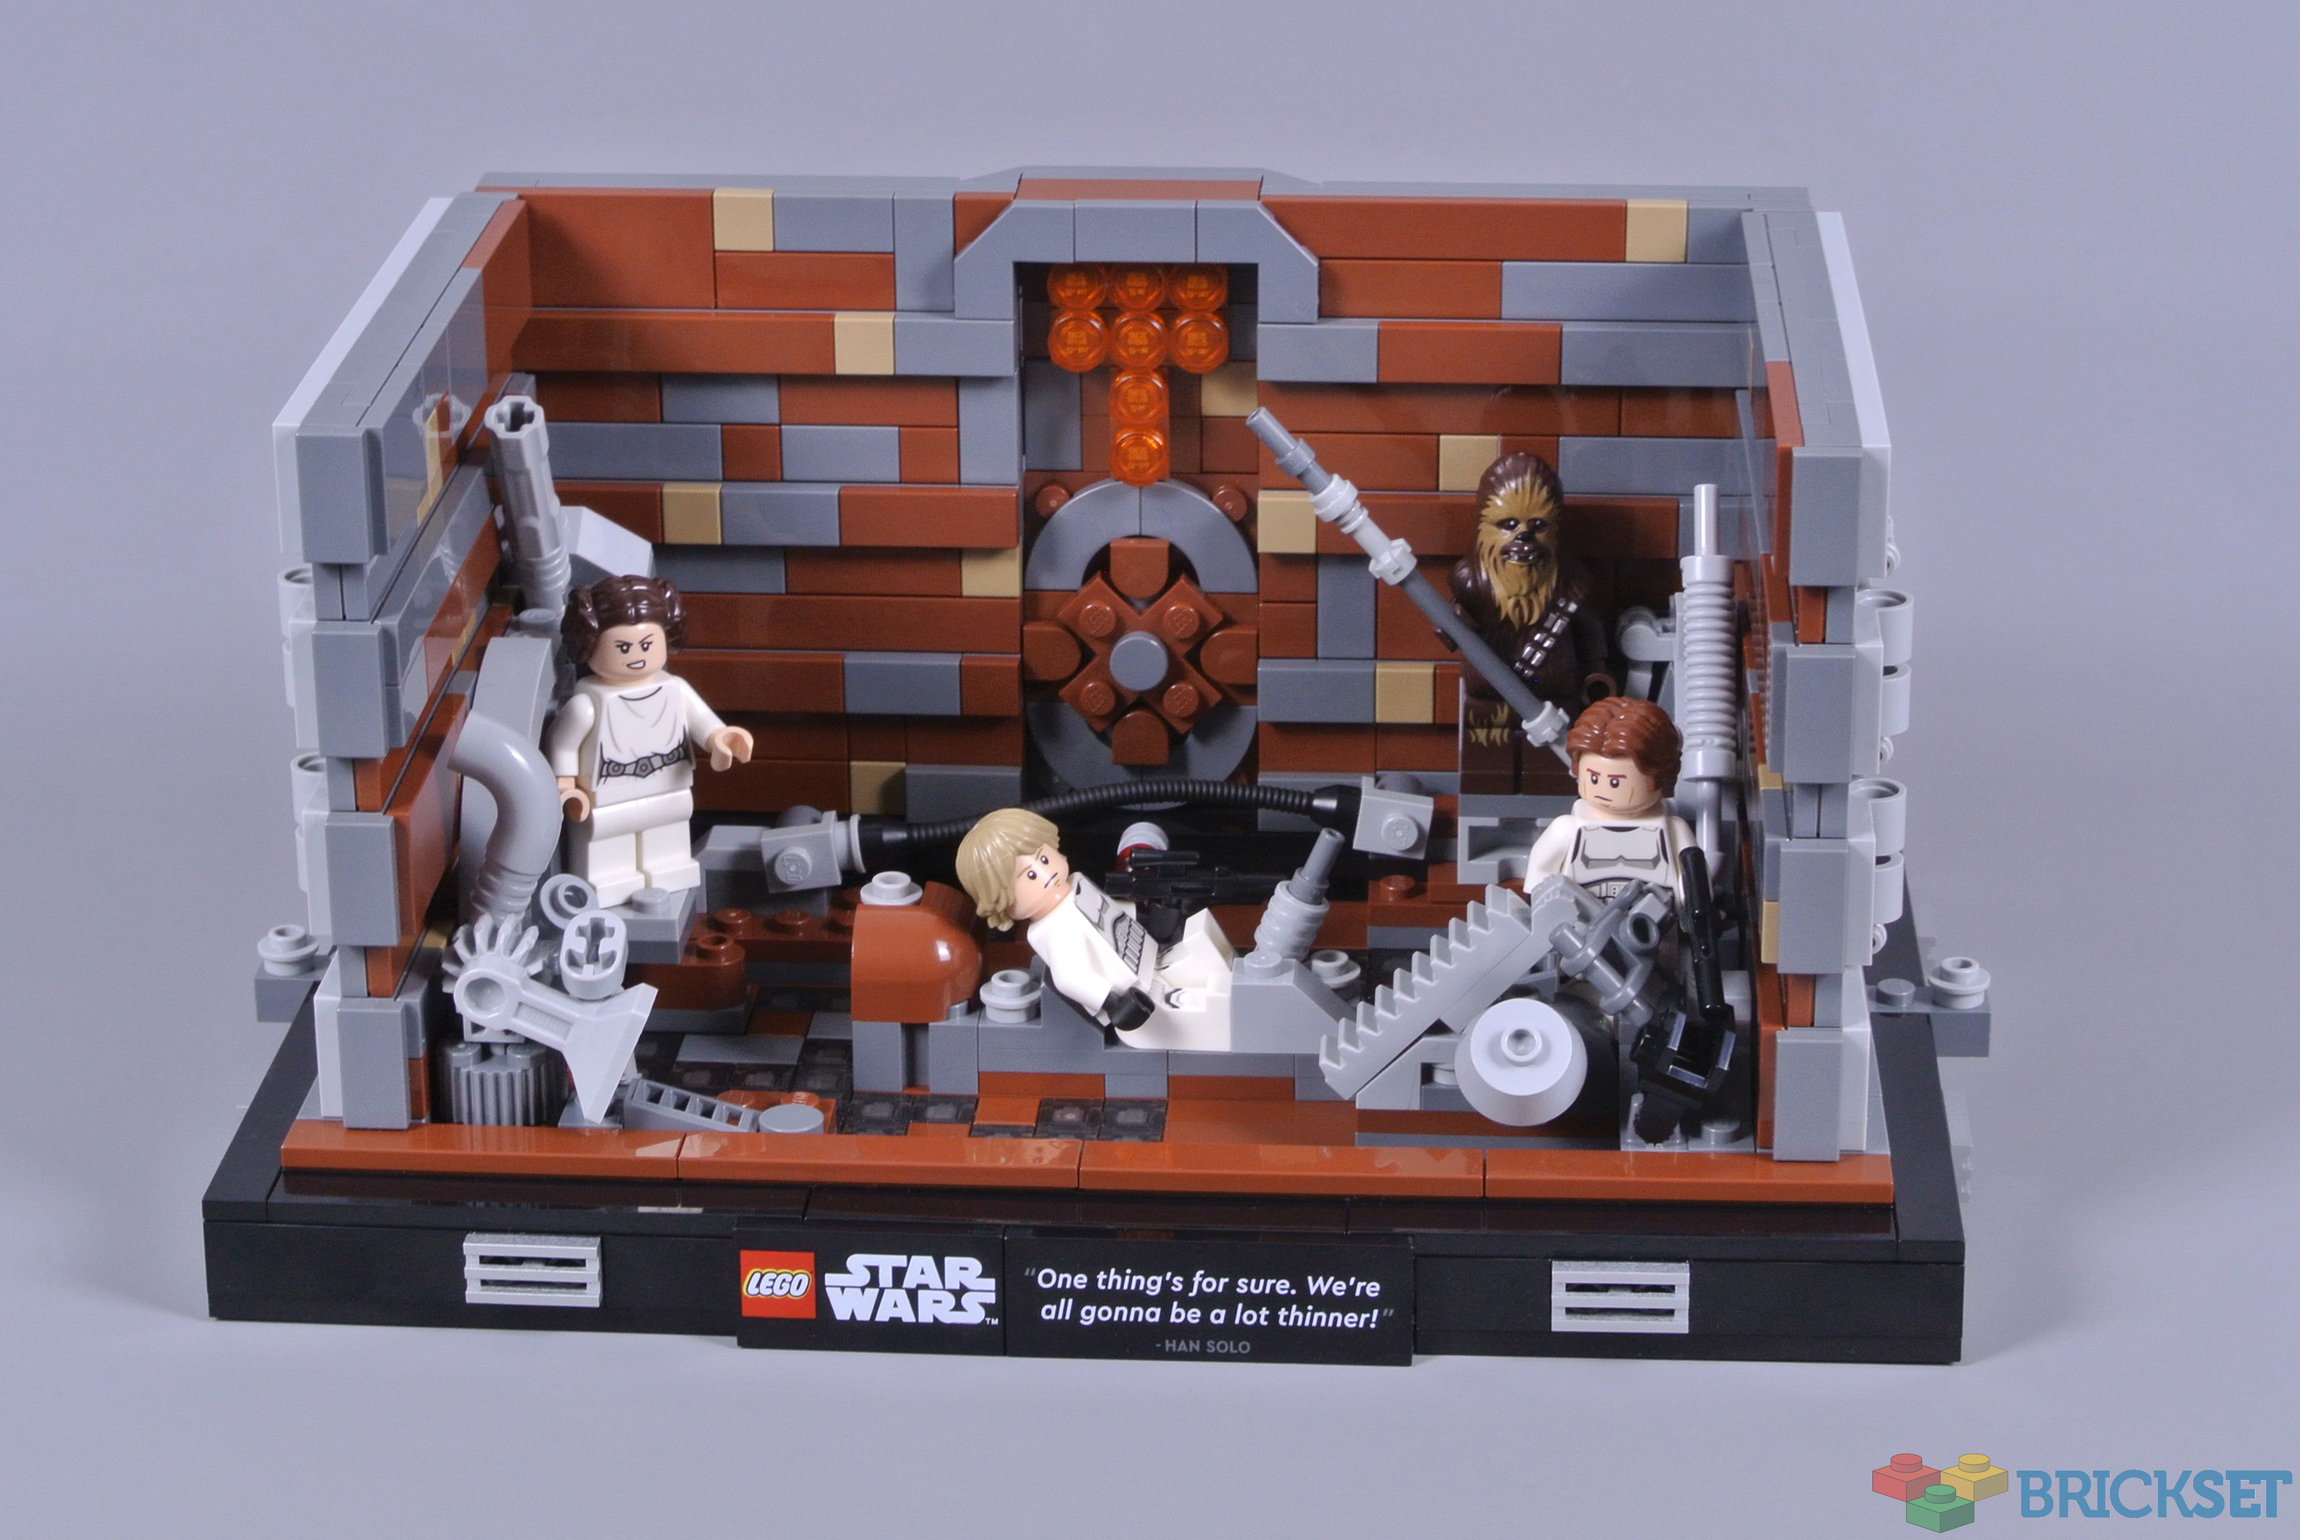 LEGO Star Wars Dioramas 75329, 75330 & 75339 are perfect for